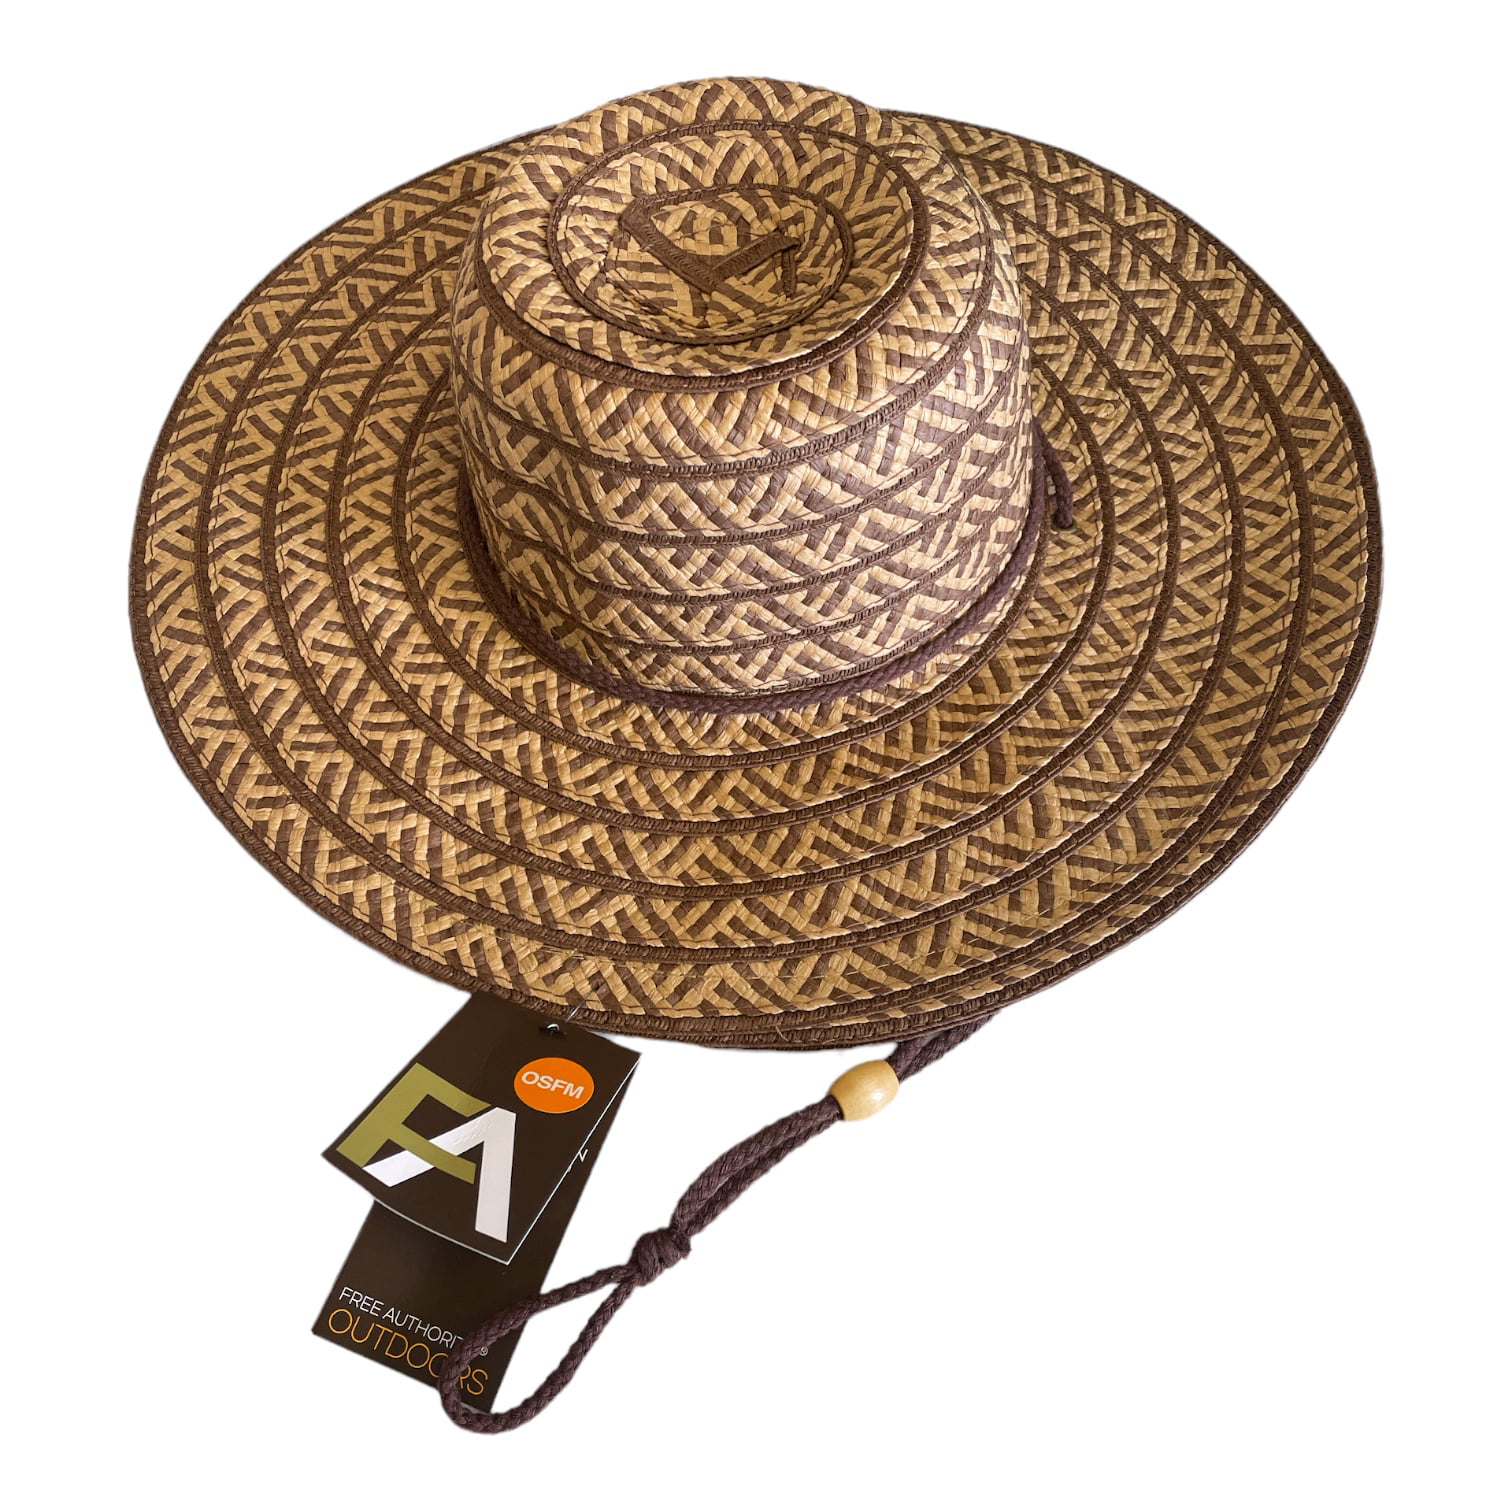 Free Authority Outdoors Floppy Tan Sun Hat, UPF 50+, 16 One Size (Brown)